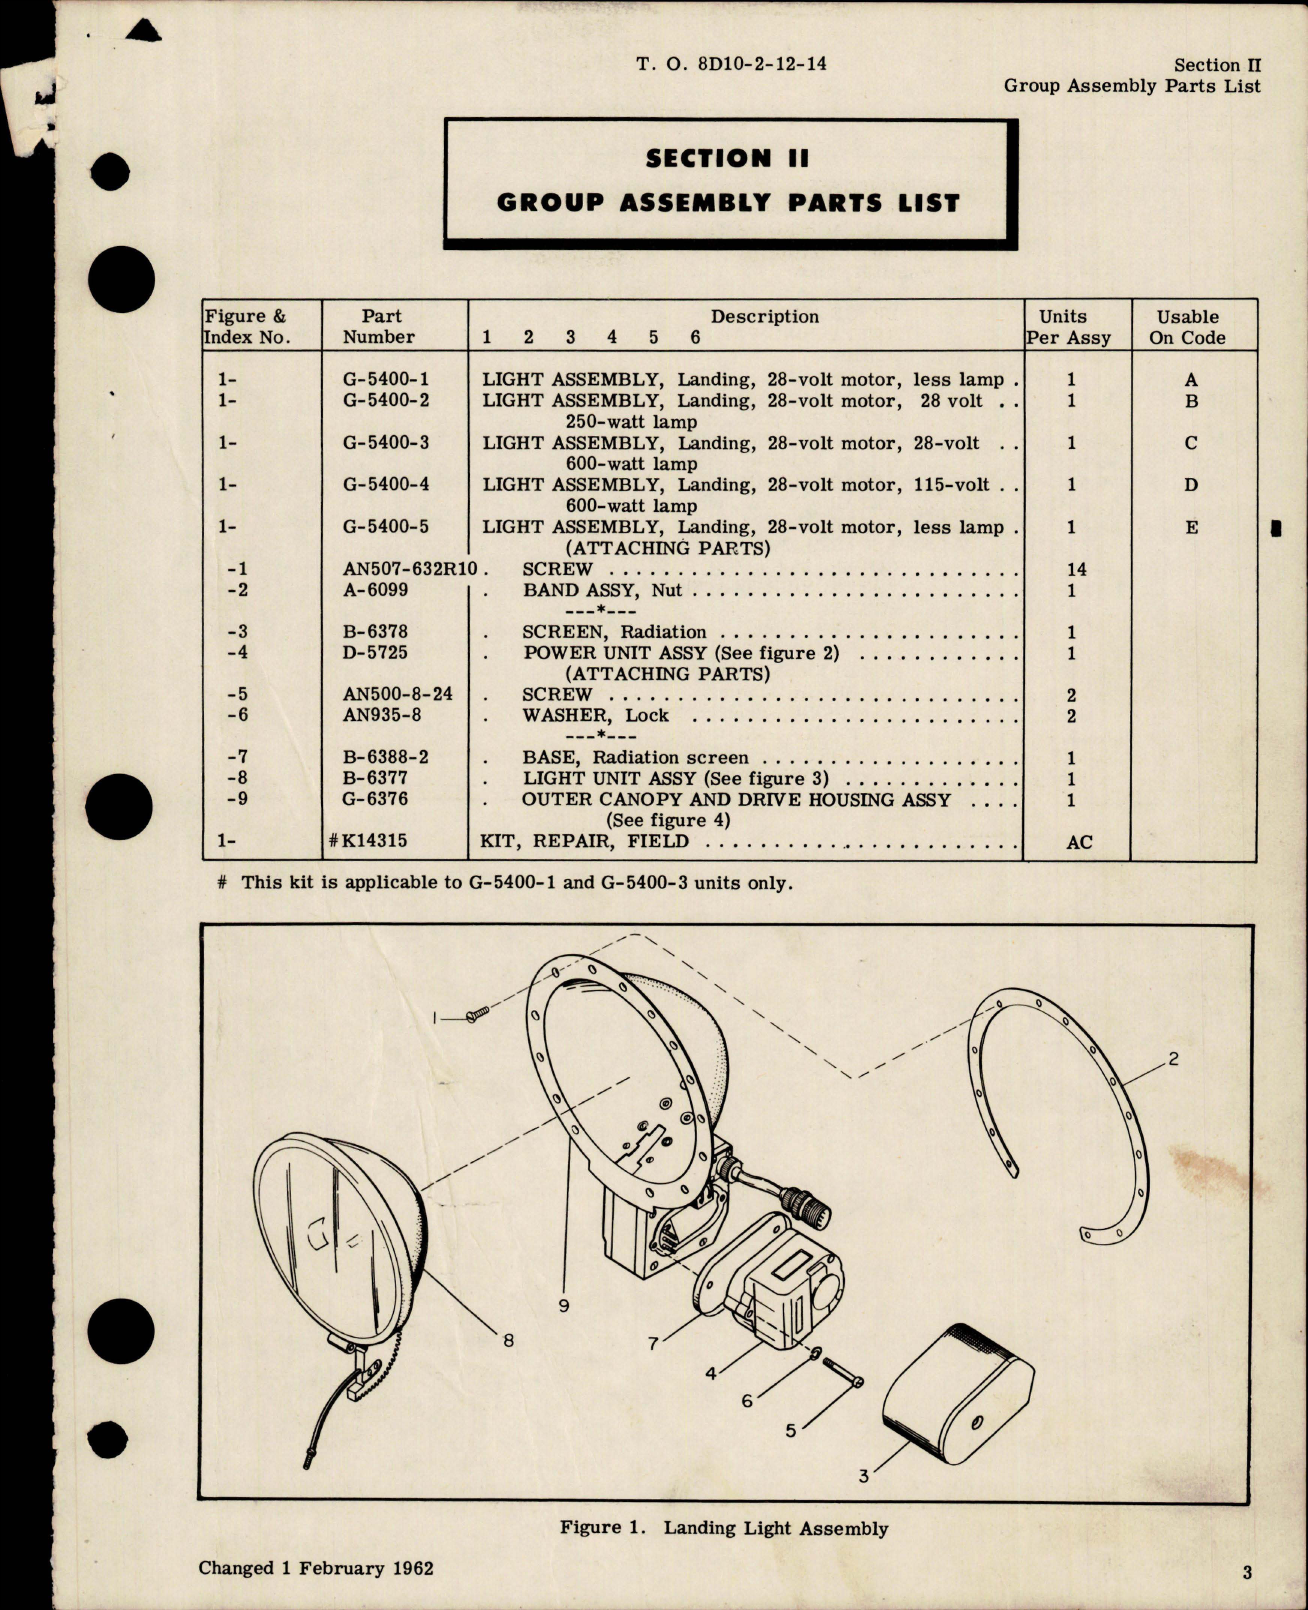 Sample page 7 from AirCorps Library document: Illustrated Parts Breakdown for Electrically Retractable Landing Light Assemblies